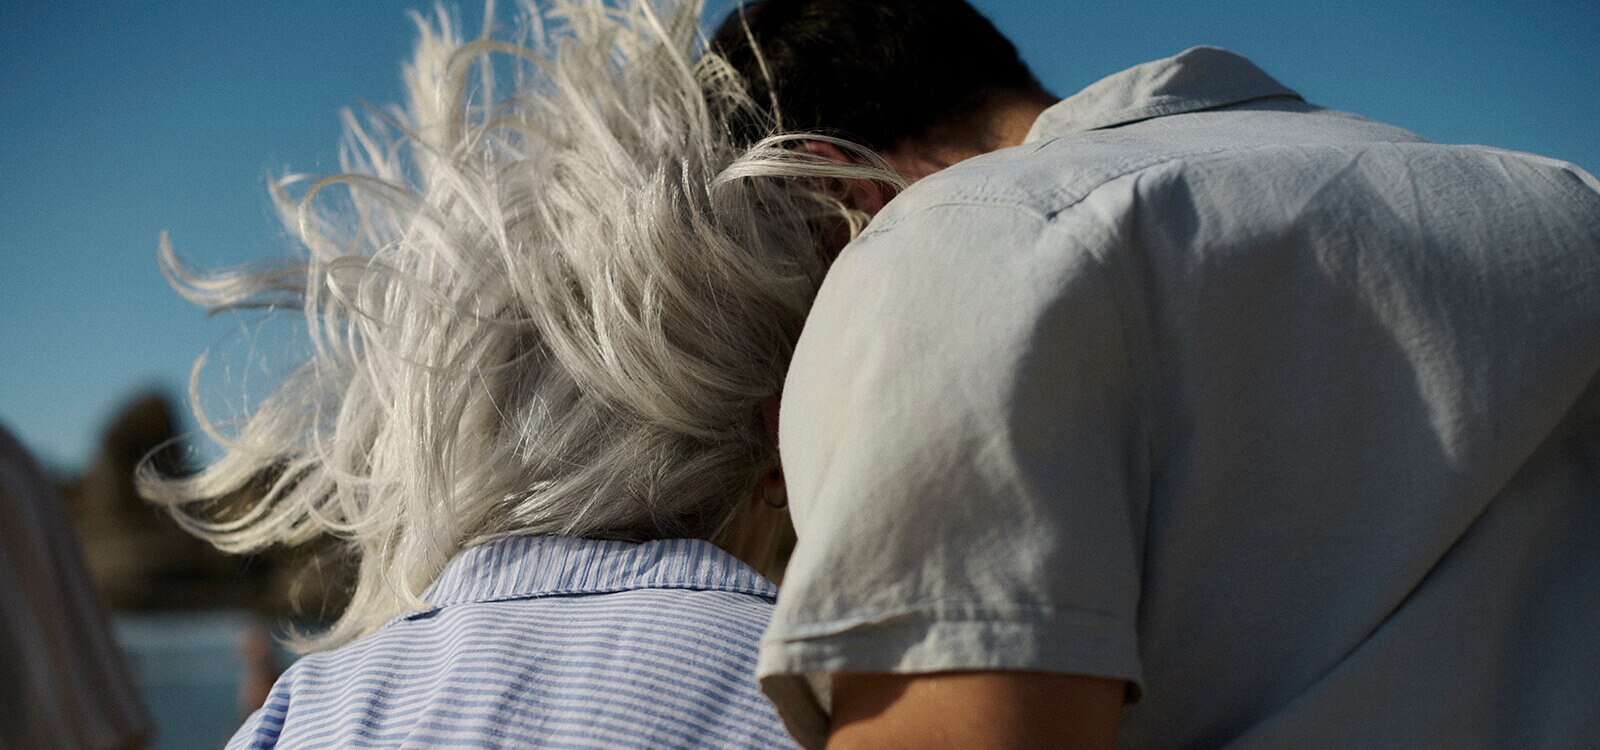 TENA-CGR-Sustainability-Lifestyle-Mother-son-closeup-behind-hugging-on-beach-Campaign-1600x750px.jpg                                                                                                                                                                                                                                                                                                                                                                                                                